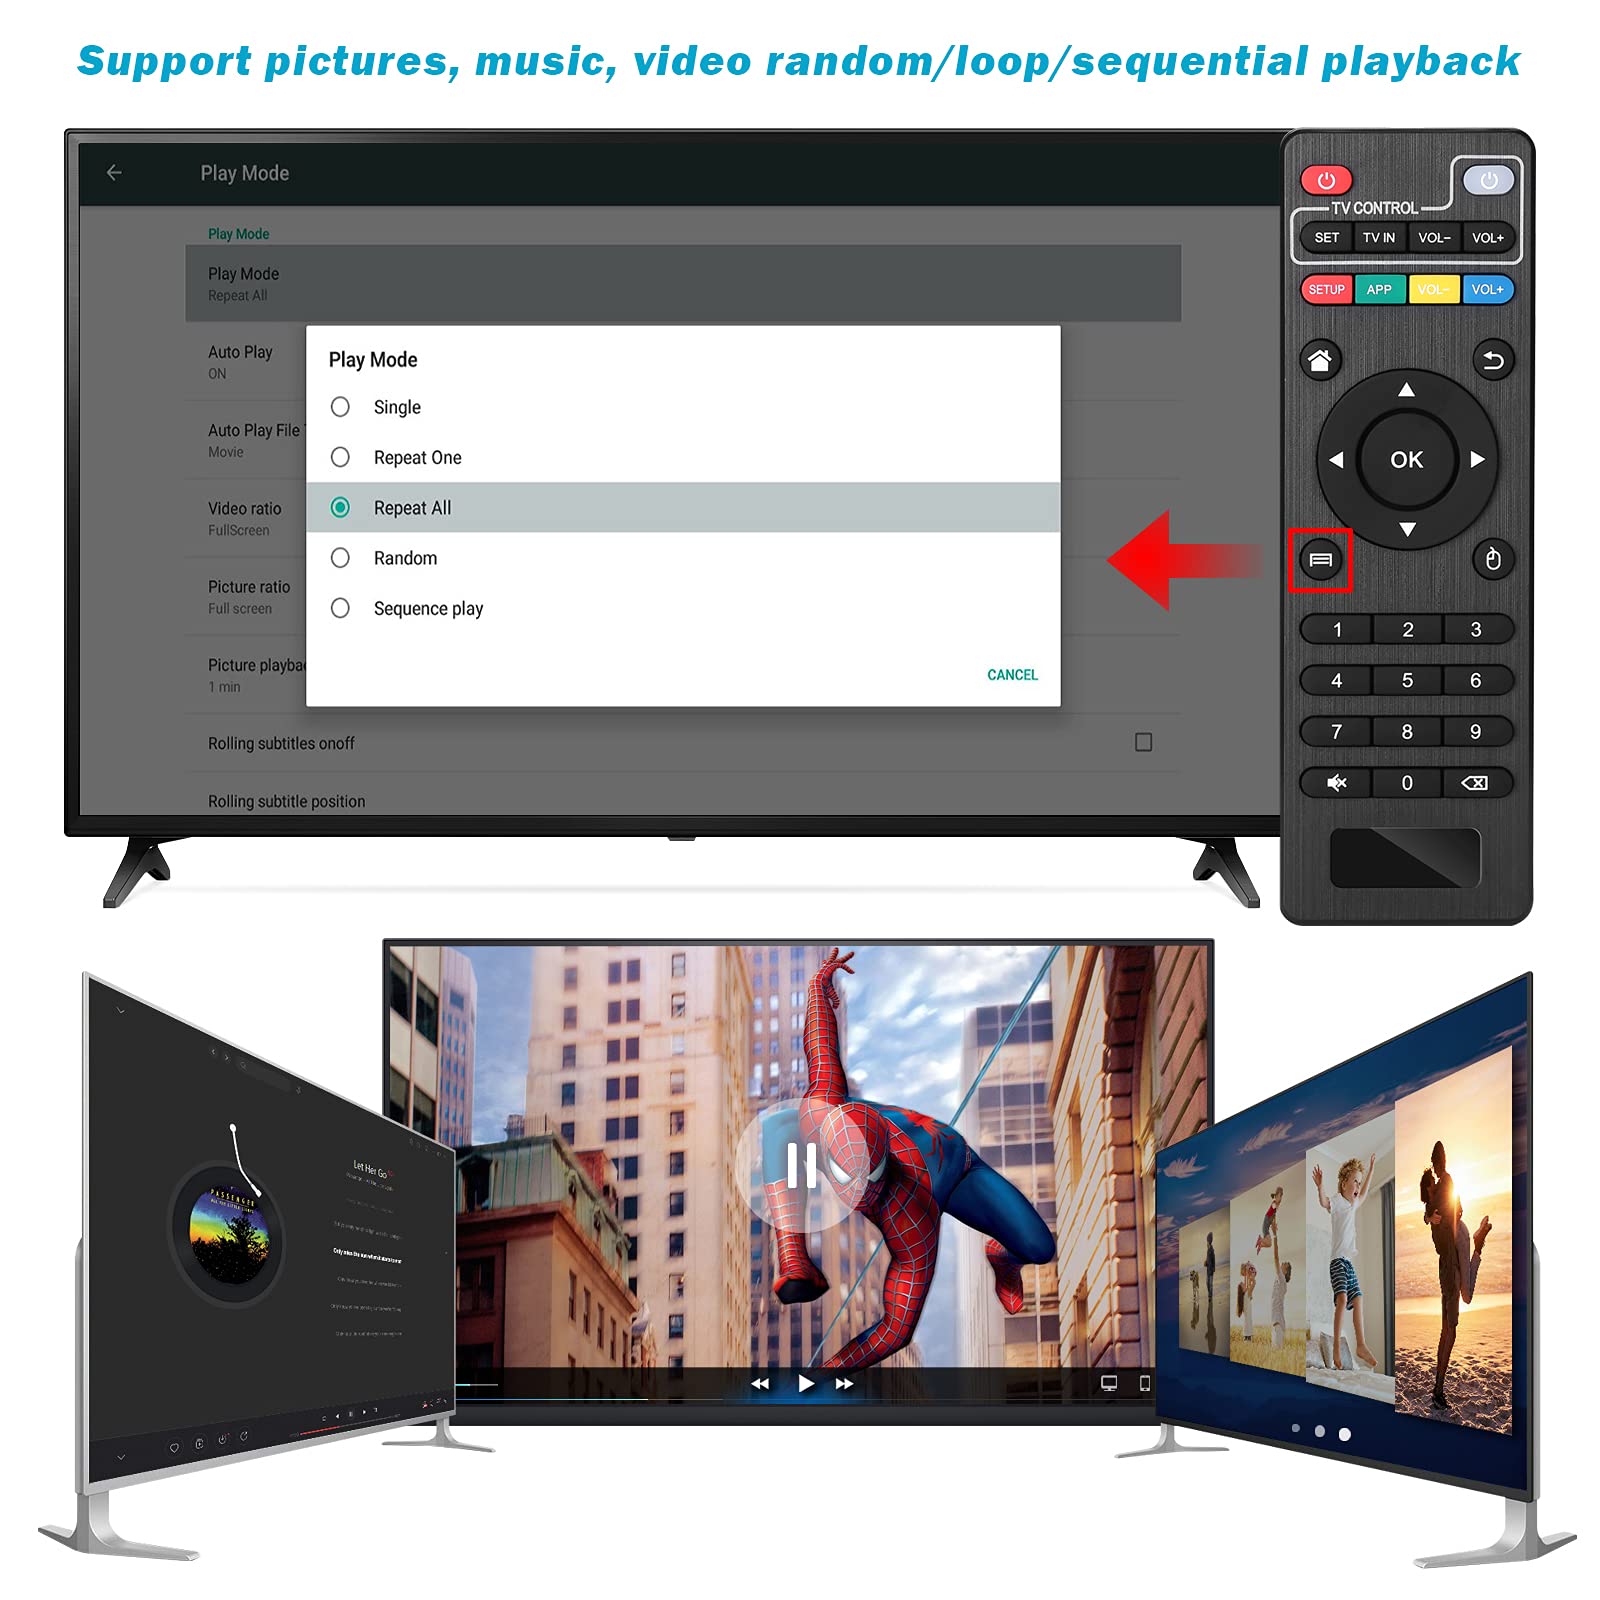 4K@60hz MP4 Media Player with ONE AV Cable Support 8TB HDD/ 256G USB Drive/SD Card with HDMI/AV Out for HDTV/PPT MKV AVI MP4 H.265-Support Advertising Subtitles/Timing, Networkable, Mouse&Keyboard